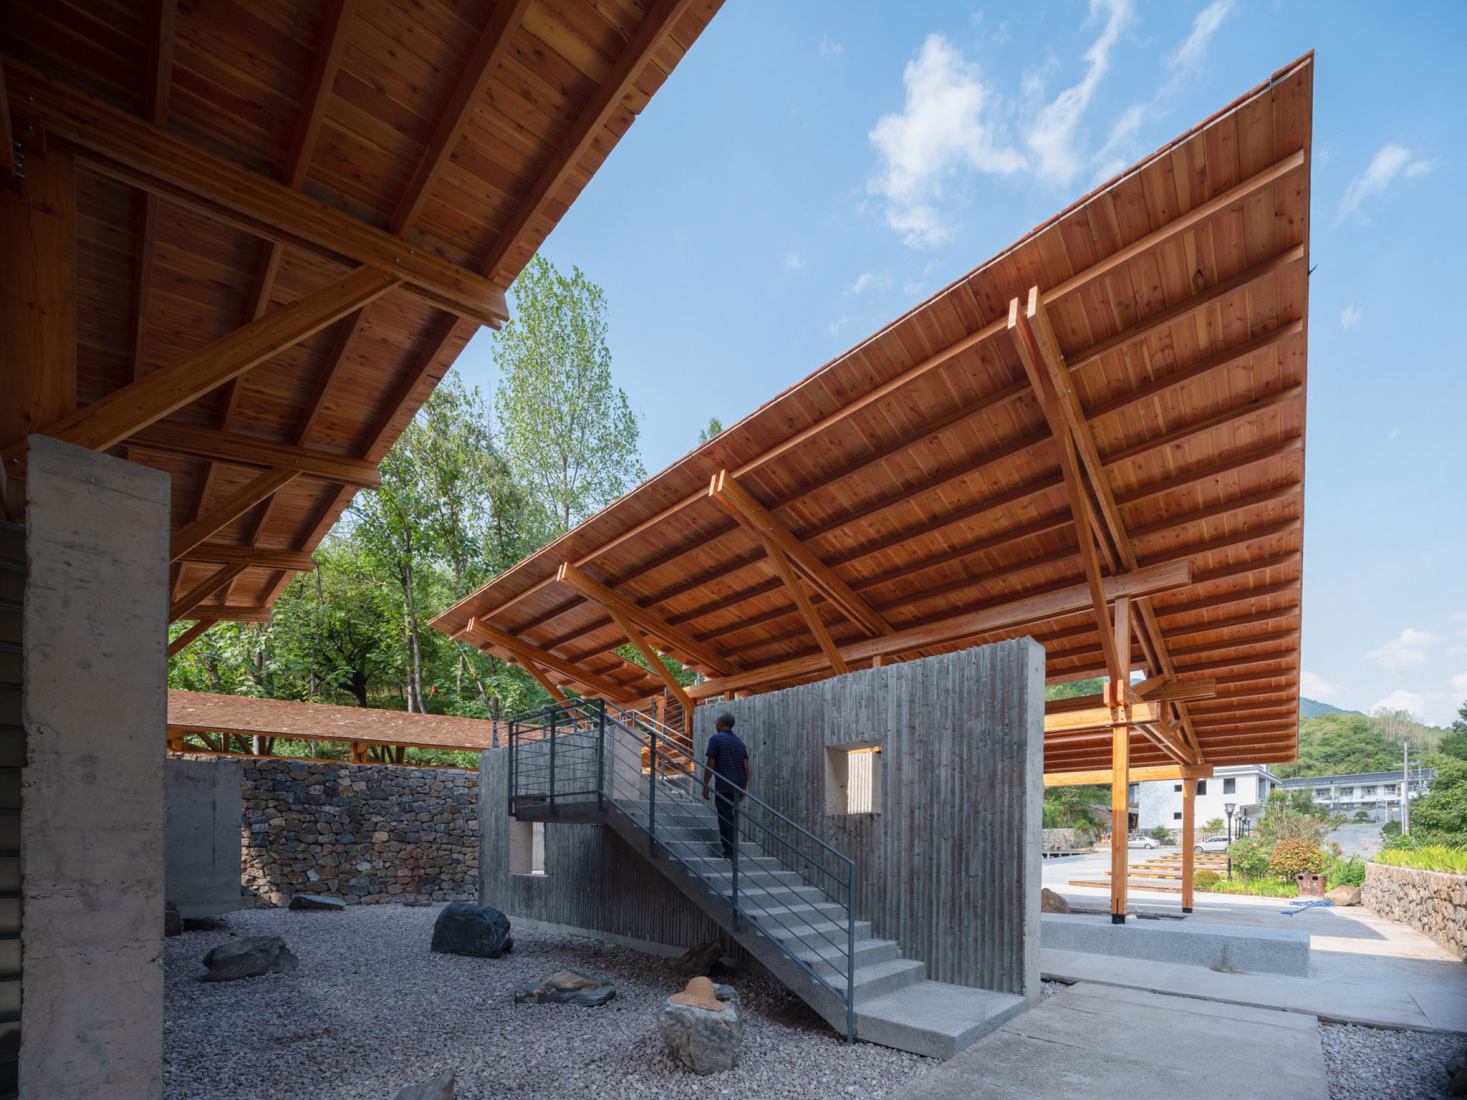 Multifunctional Service Center of Liuba Mountain Scenic Area by Shulin Architectural Design. Photograph by Yilong Zhao and Ang Wu.